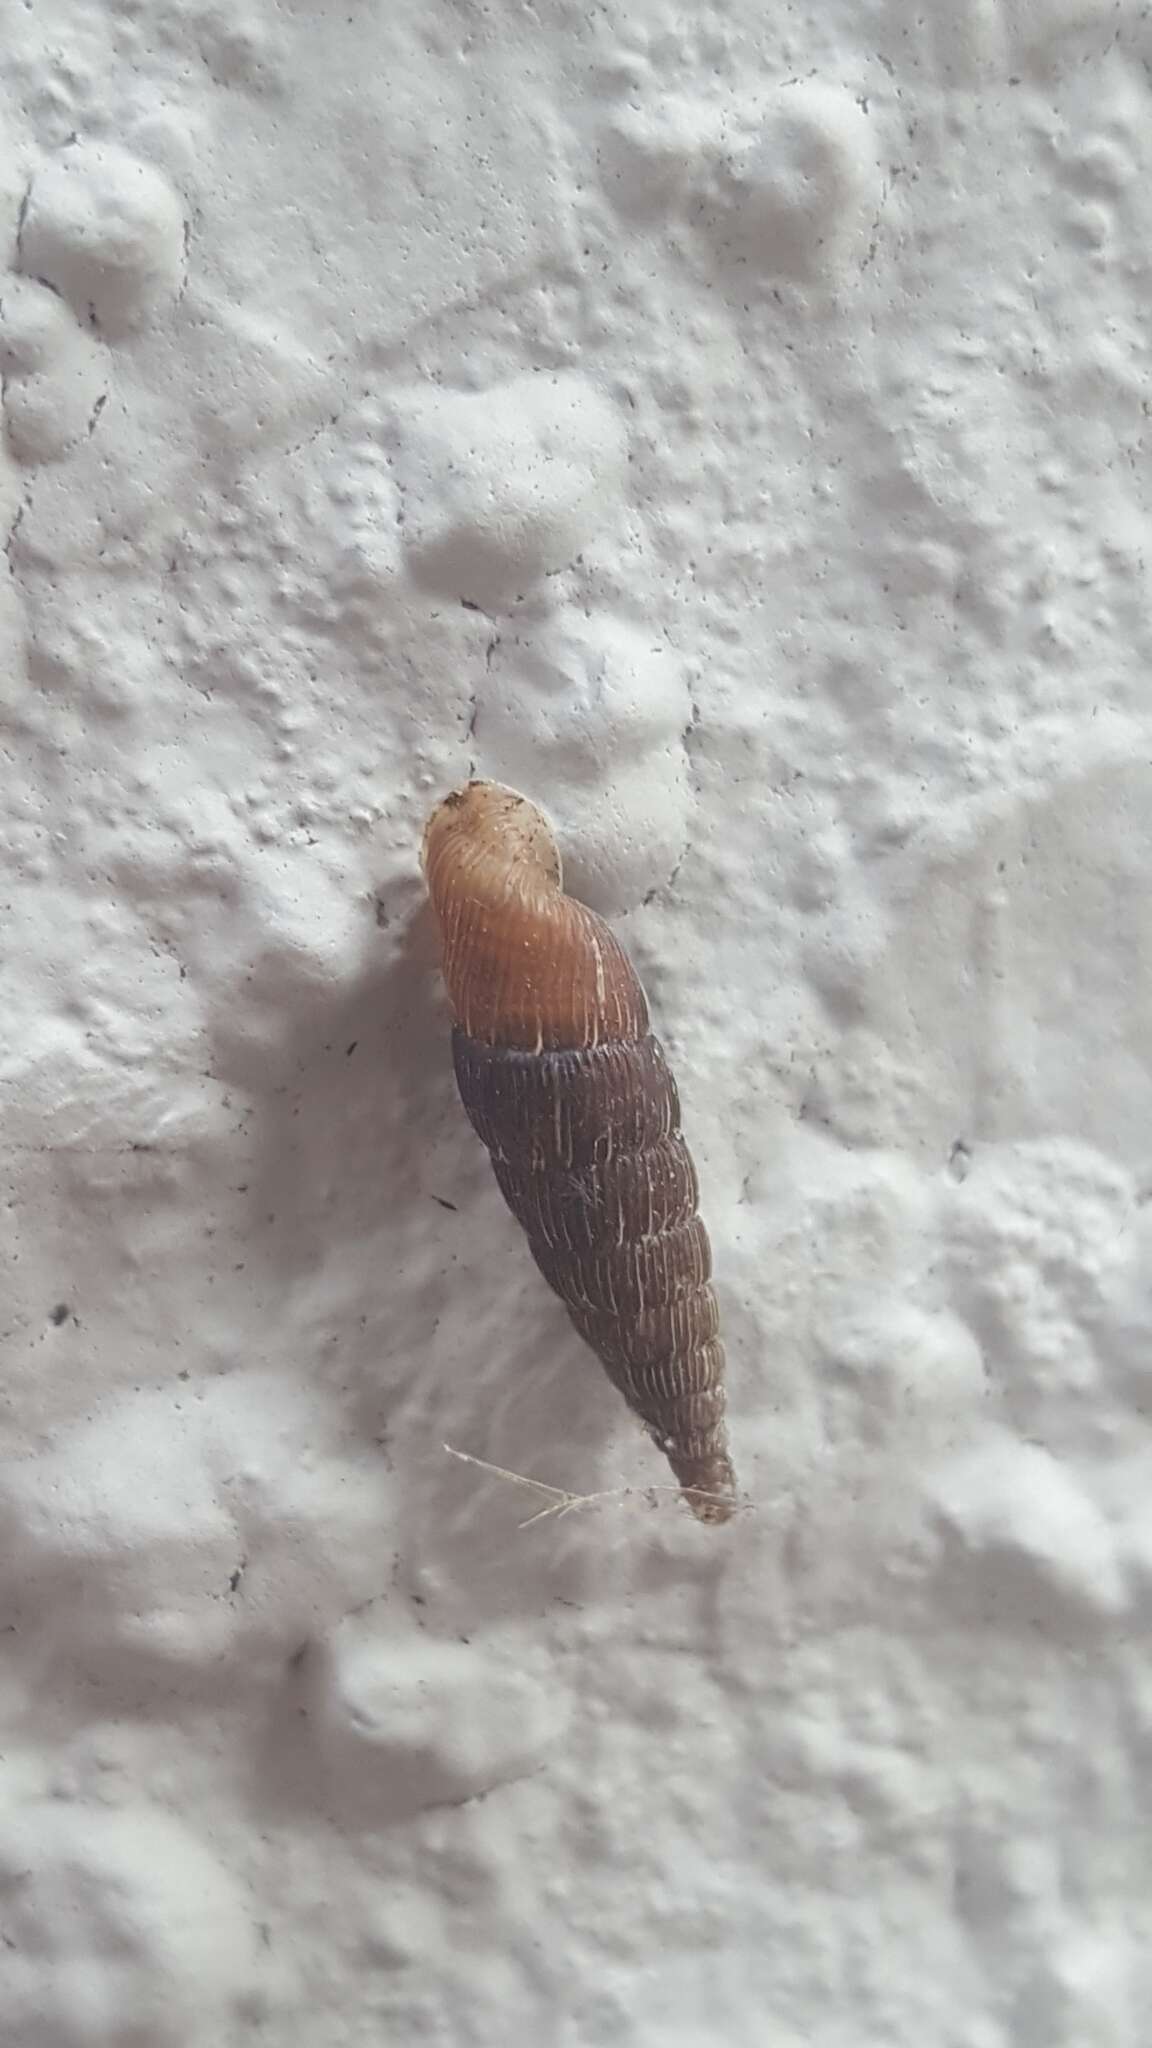 Image of two-lipped door snail